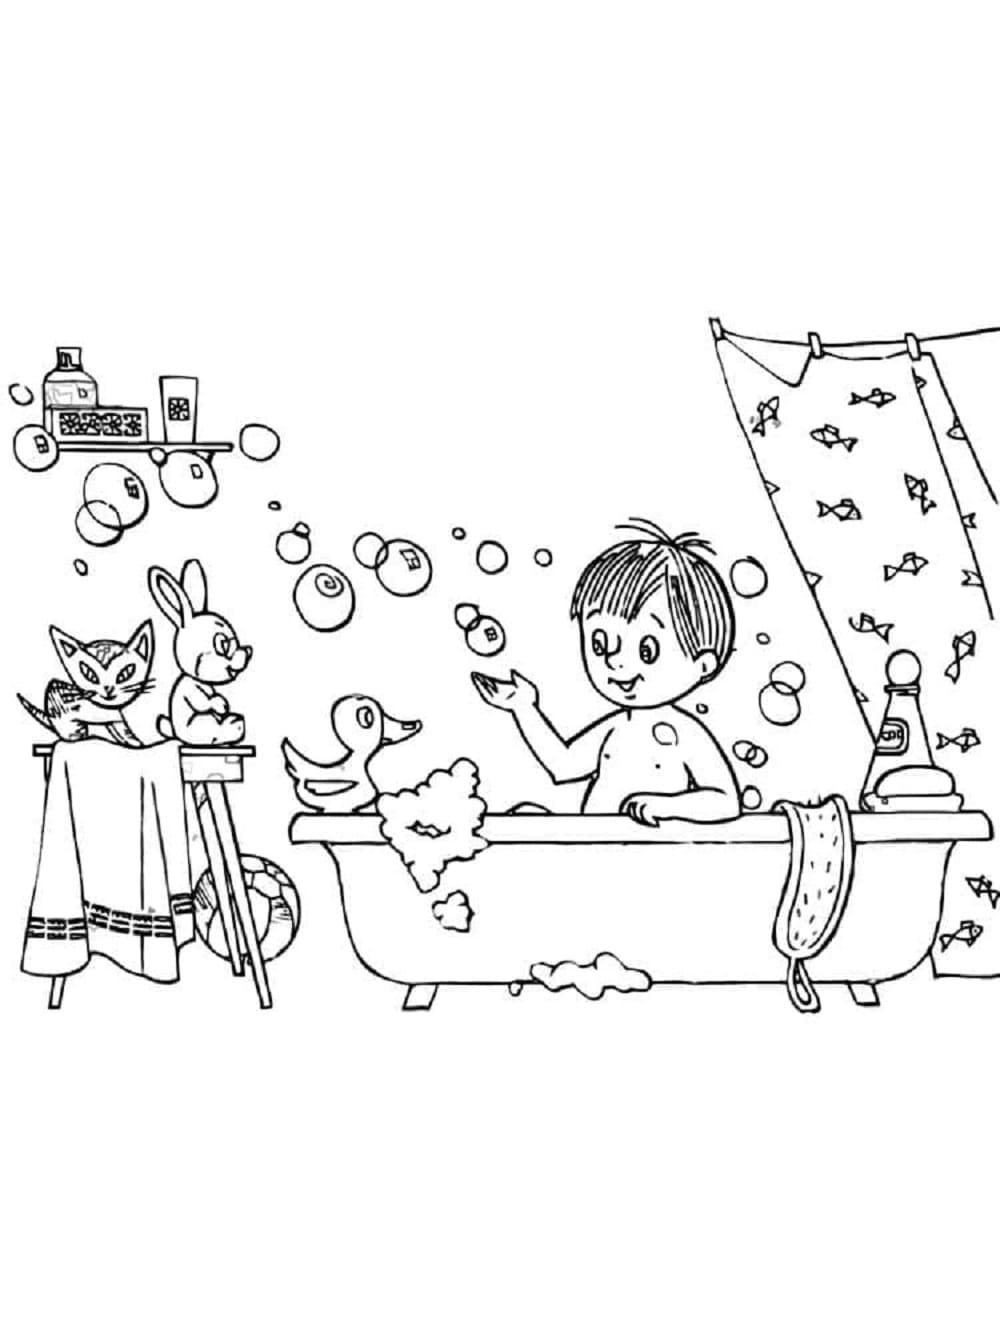 Printable Hyigene Boy In Tub Coloring Page